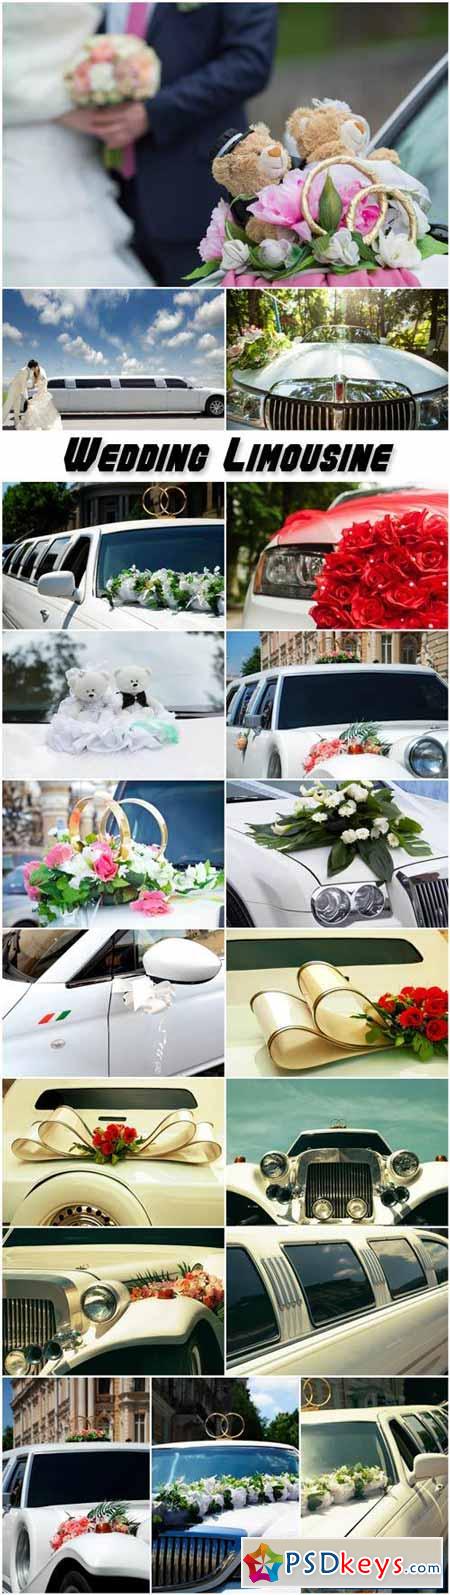 Wedding limousine, the bride and groom